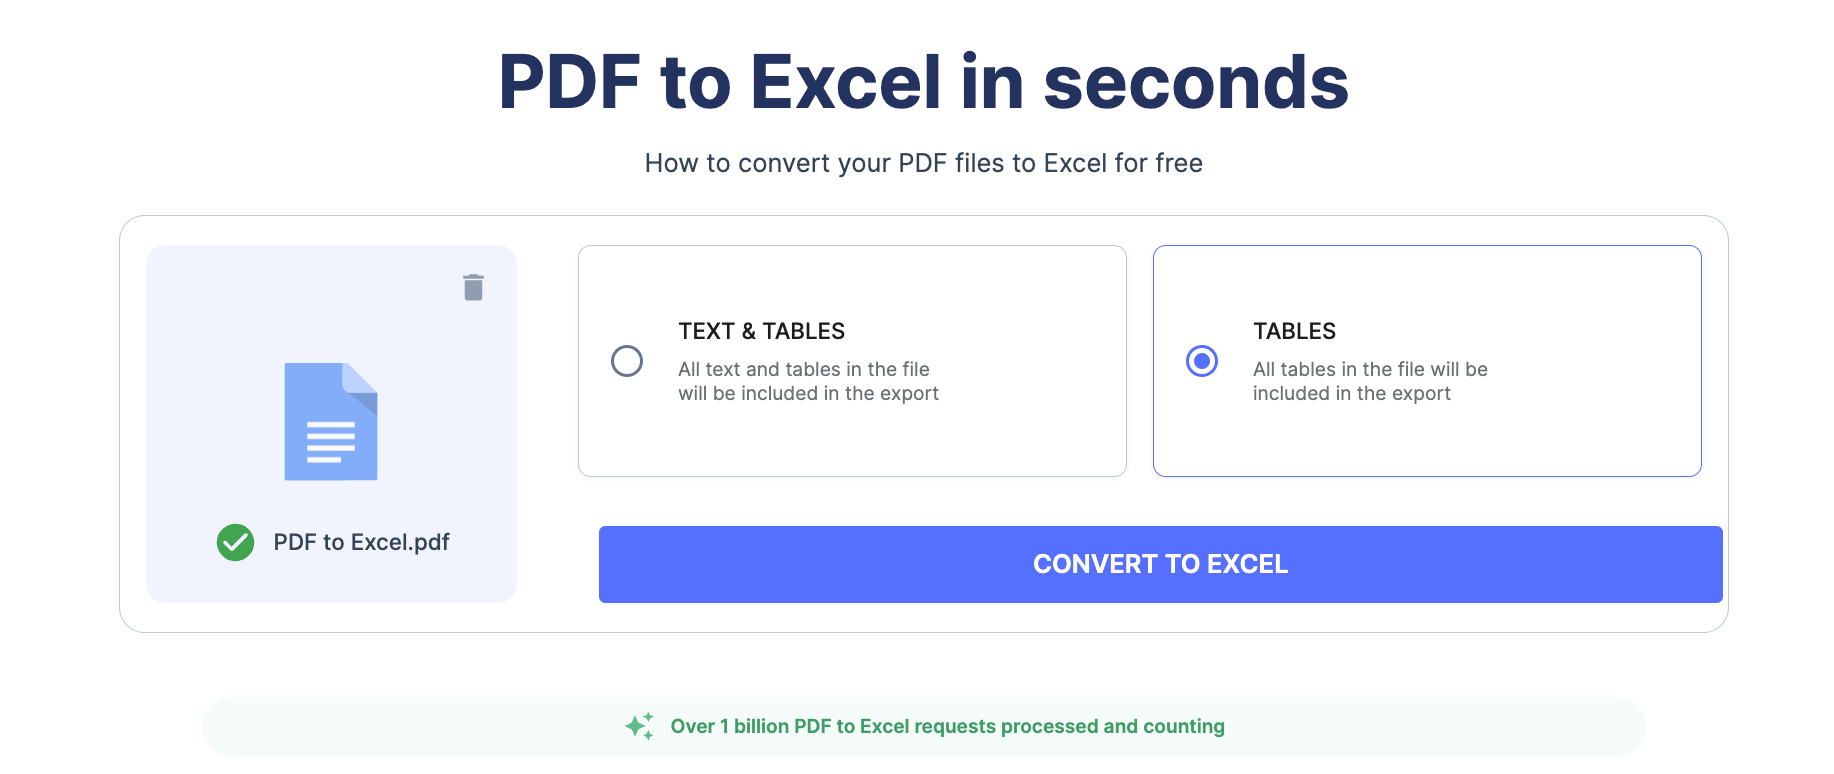 Upload PDF file to be converter to Excel